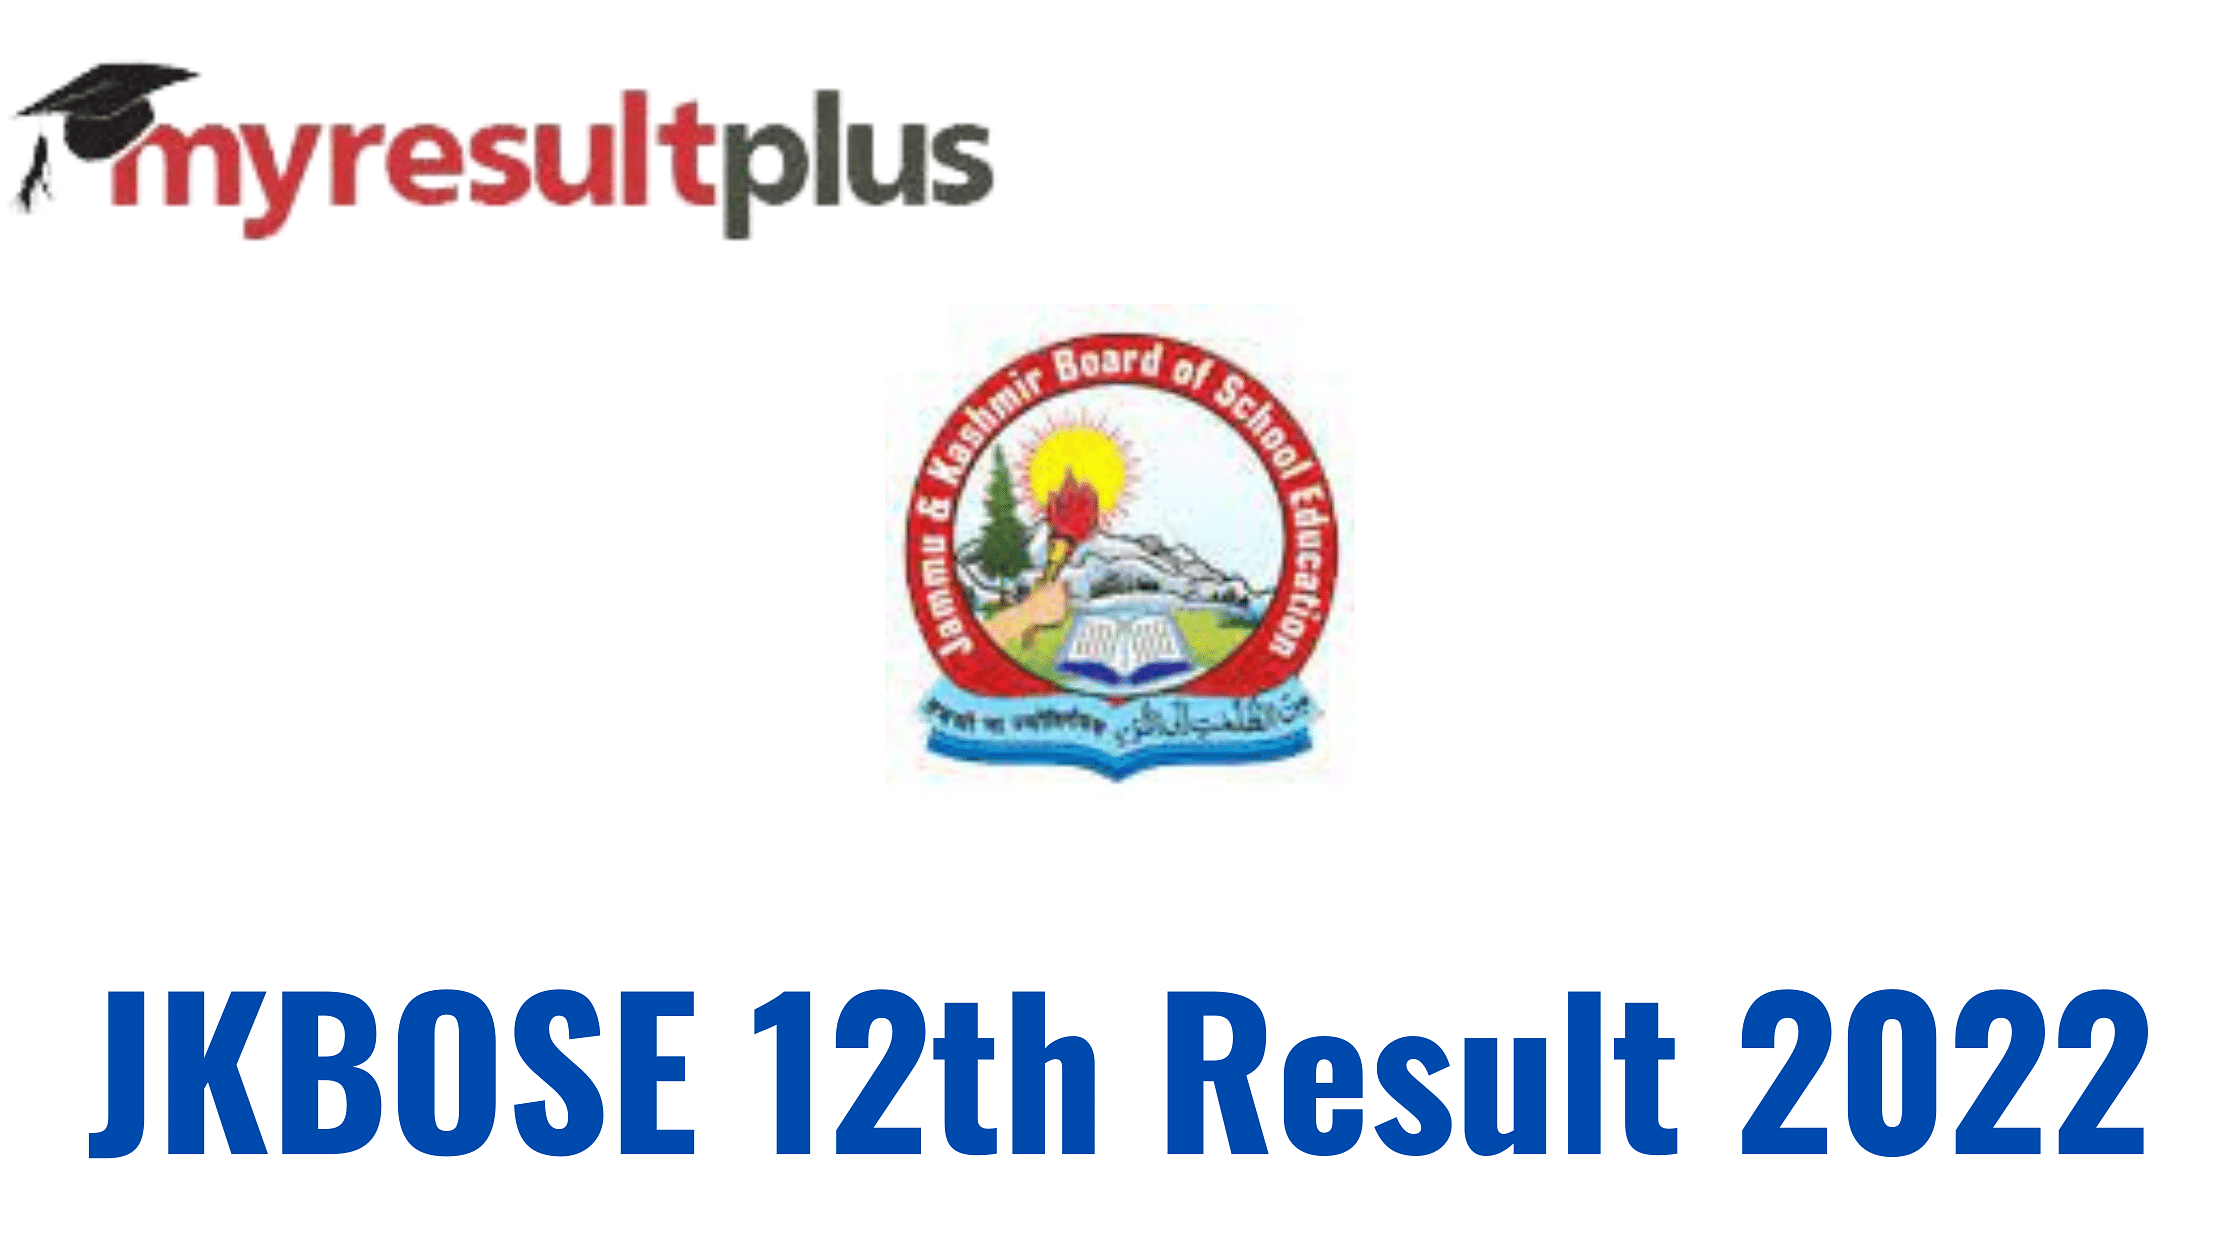 JKBOSE 12th Result 2022 Out, Detailed Guide to Check Scores Here